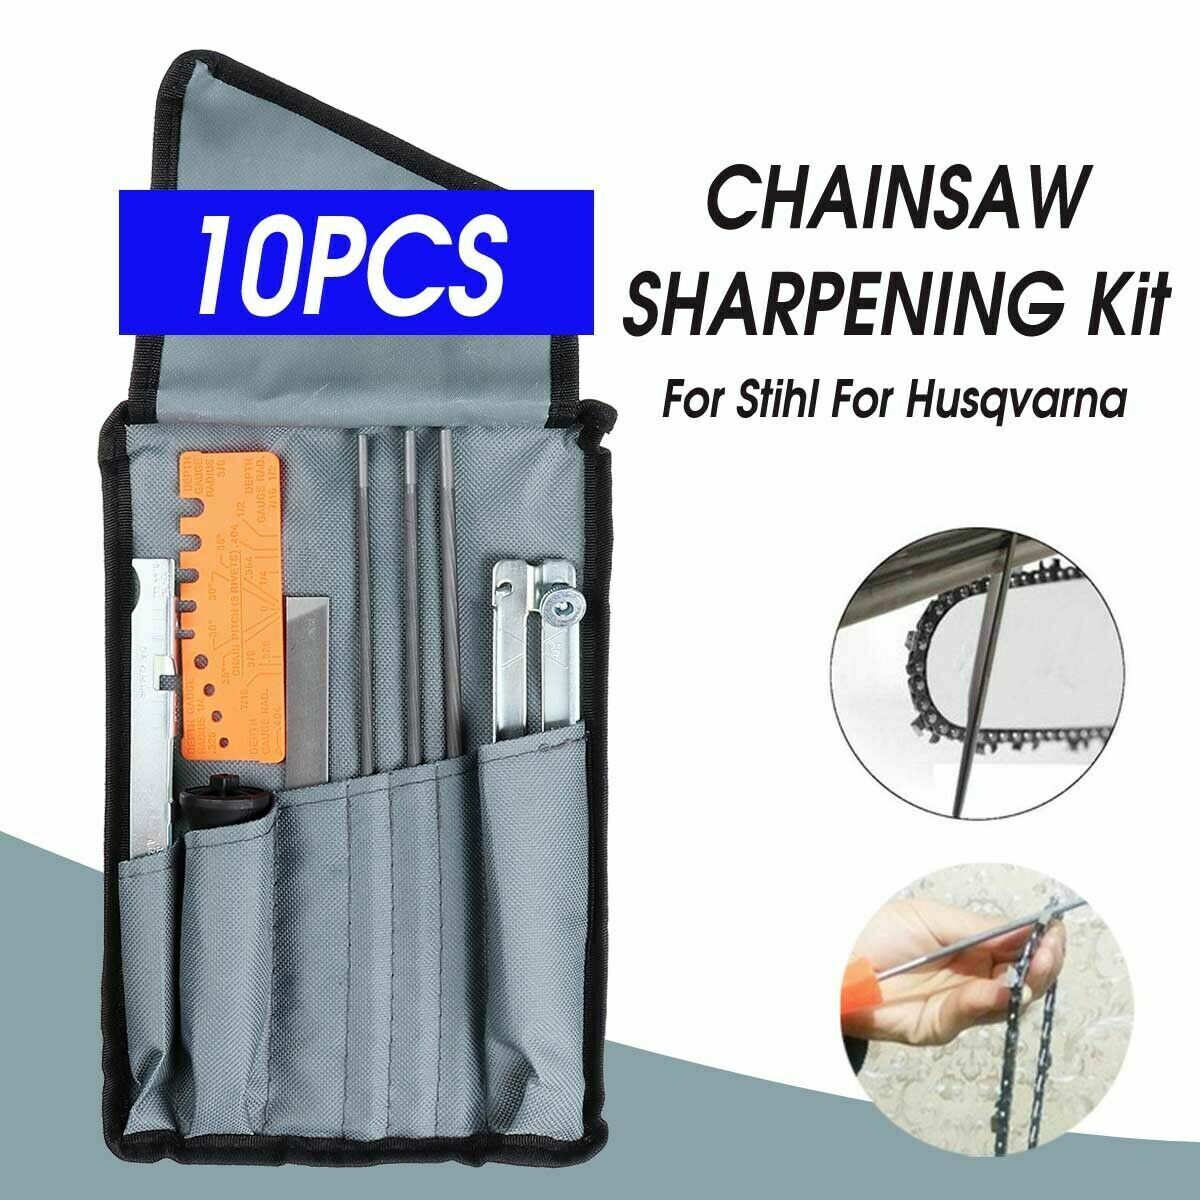 Ranking TOP10 10PCS Chainsaw Sharpening File Ranking TOP15 Filing St Sharpener For Chain Kit